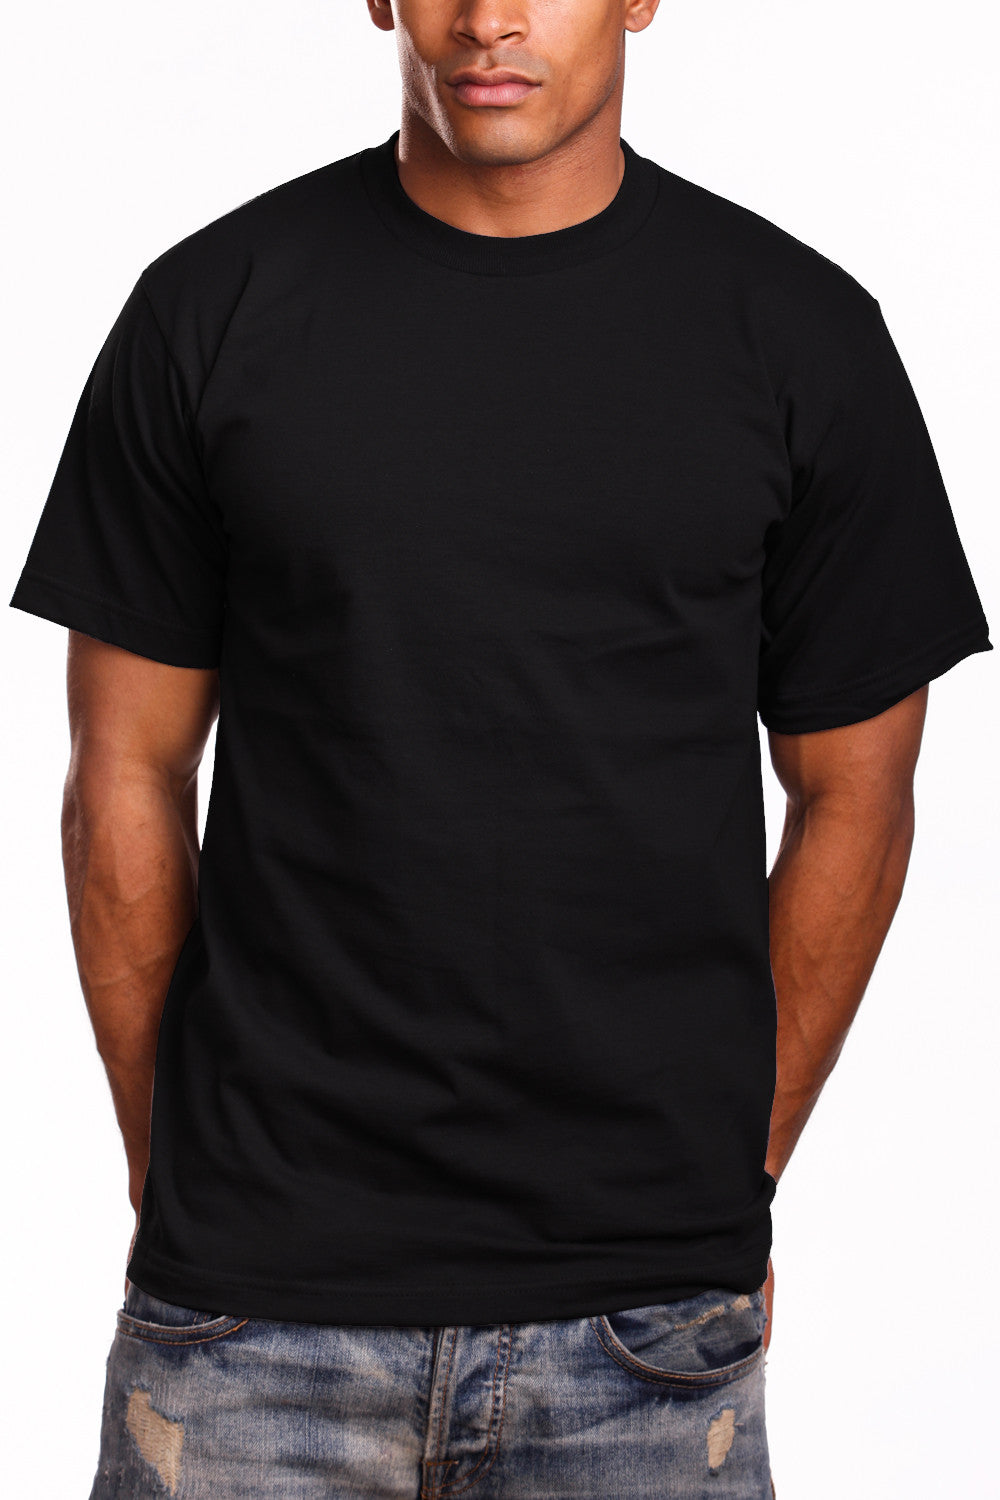 Experience the Super Heavy Black T-Shirt: Crafted with a snug-fit neckline and Lycra-reinforced collar for lasting style and quality. Available in sizes 2X-5XL and a wide range of colors. Fabric: 100% Cotton (Solid), Cotton/Poly blend (Grey), 6.7 oz weight.